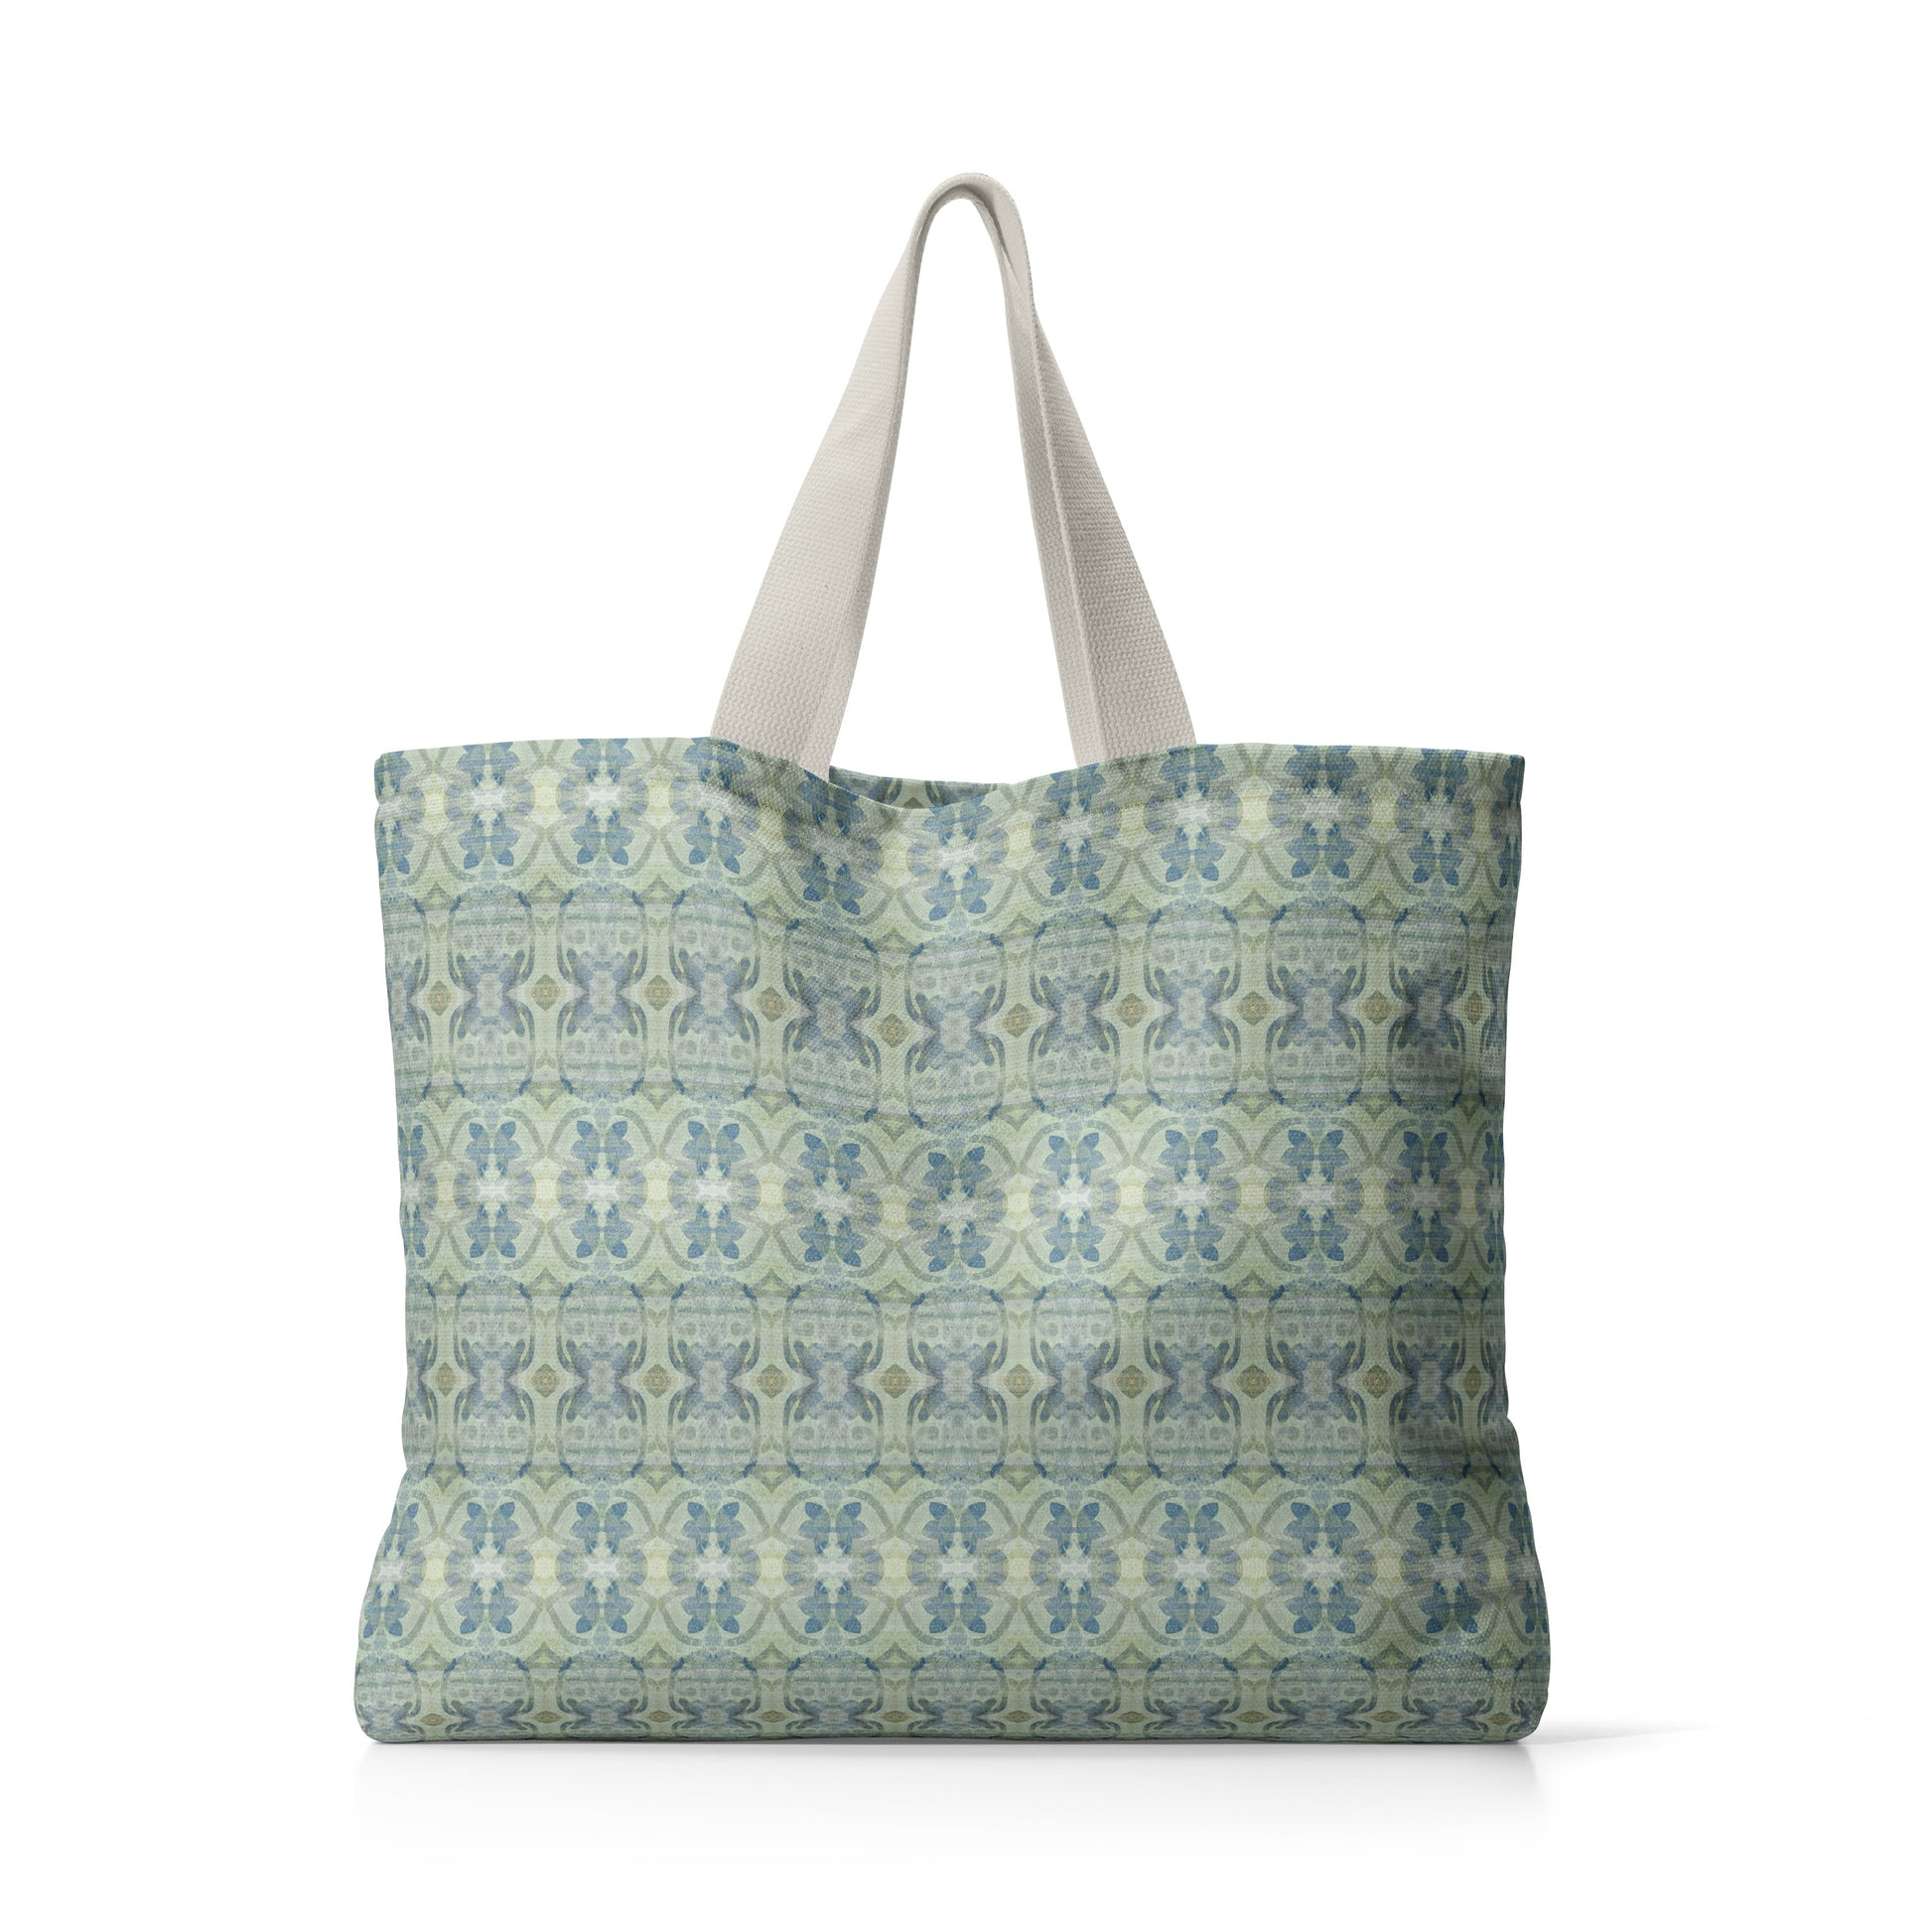 Canvas tote bag featuring an abstract blue and green pattern